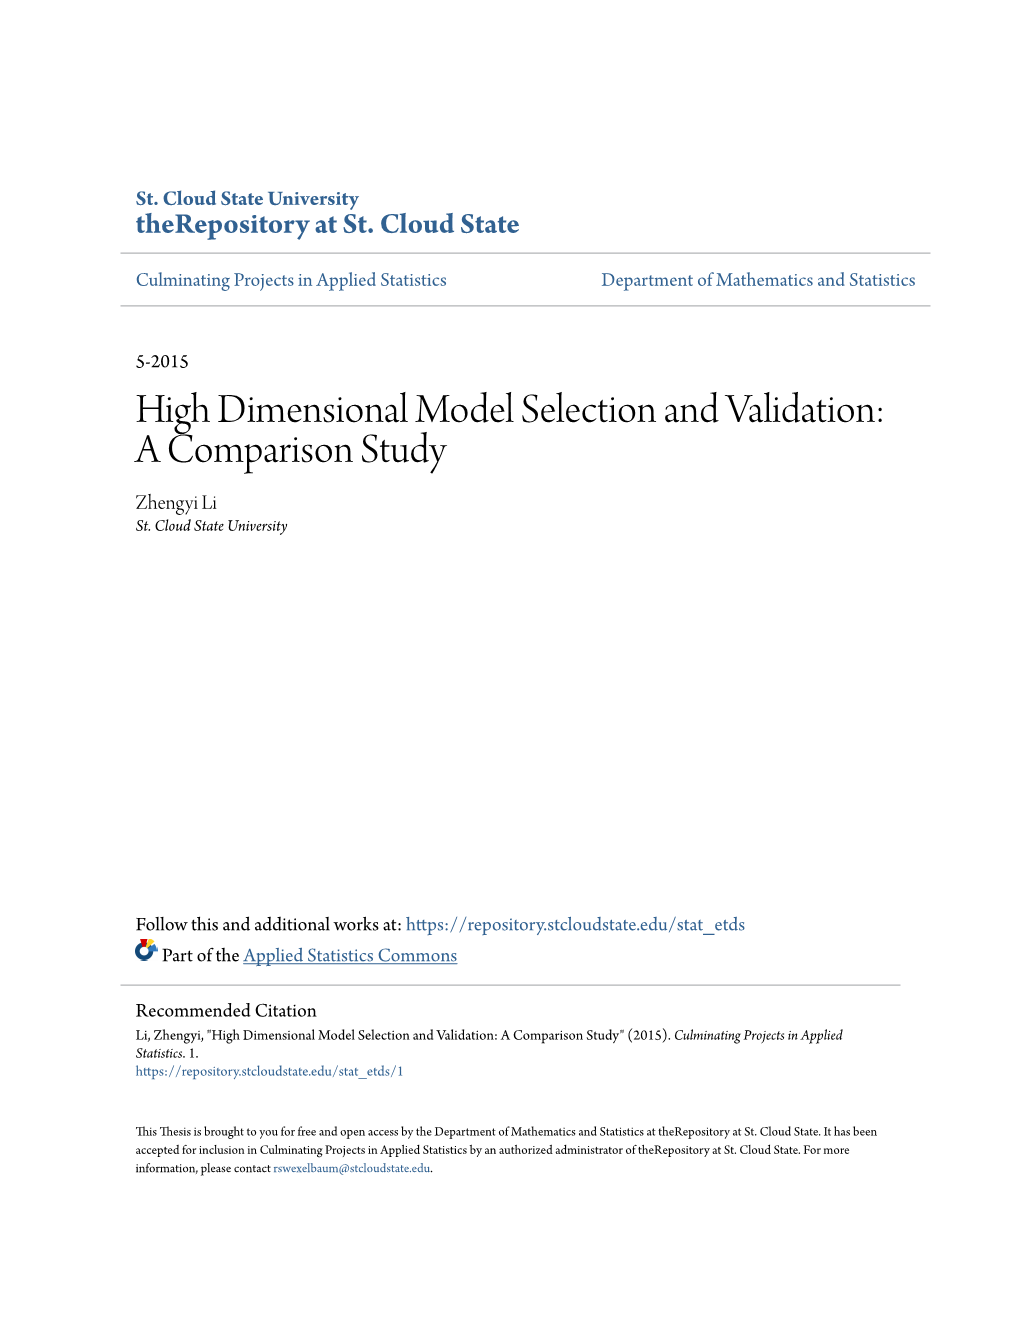 High Dimensional Model Selection and Validation: a Comparison Study Zhengyi Li St